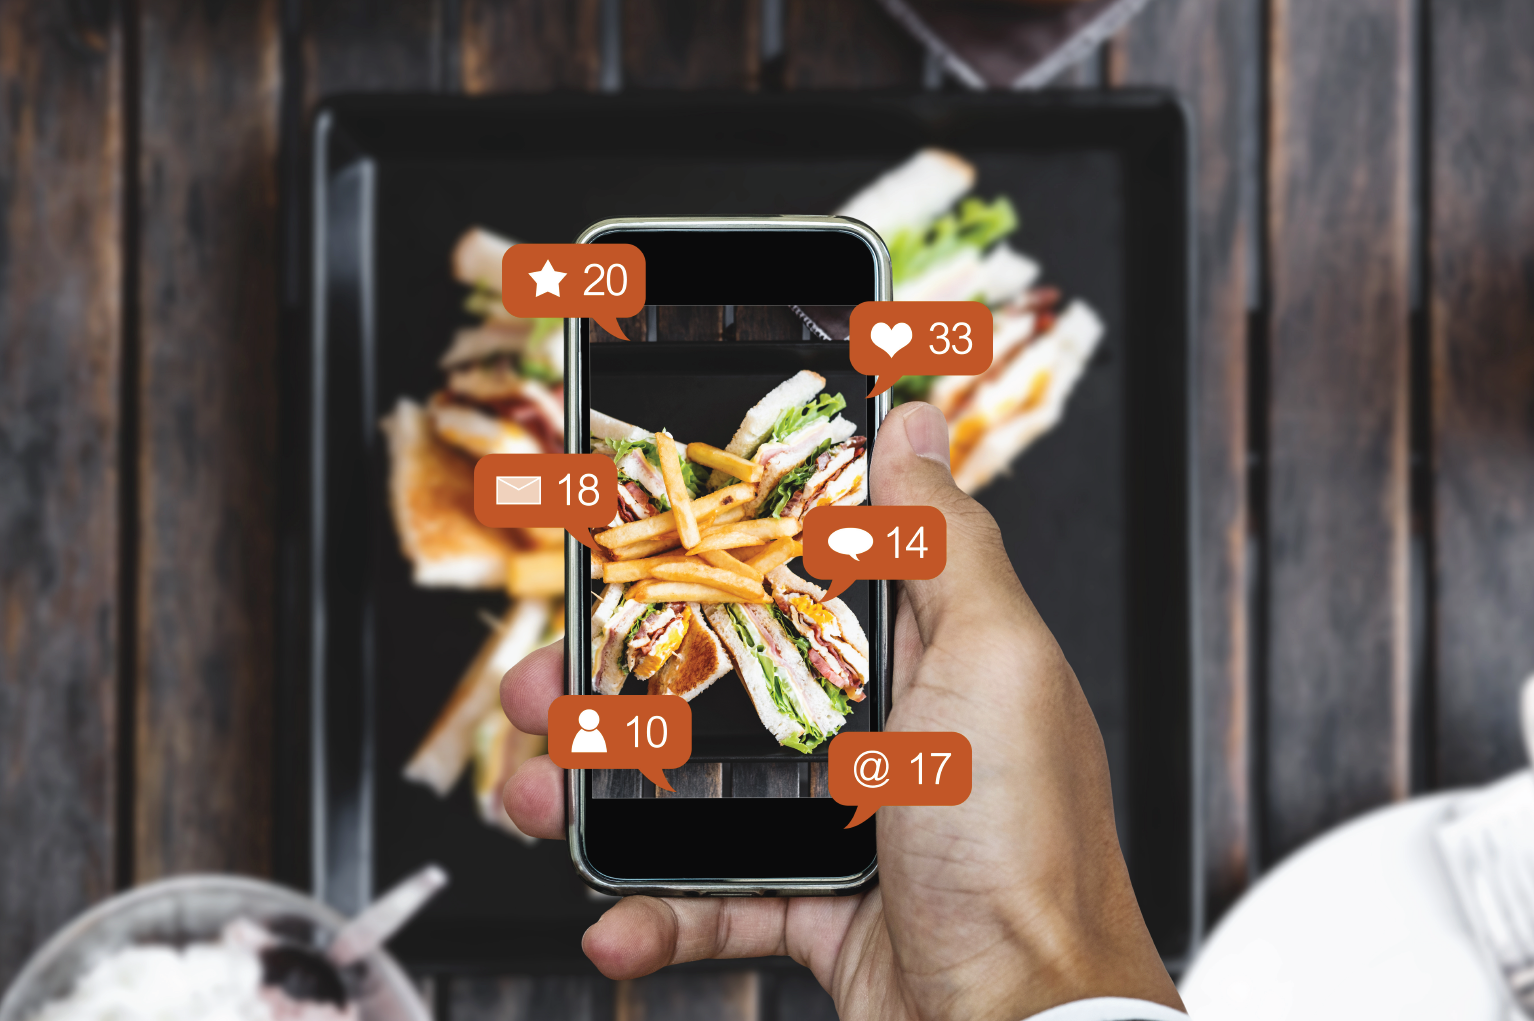 COVID-19 has changed the way consumers feel about food brand affinity. Understanding these shifts will help your business adapt amid ongoing changes.